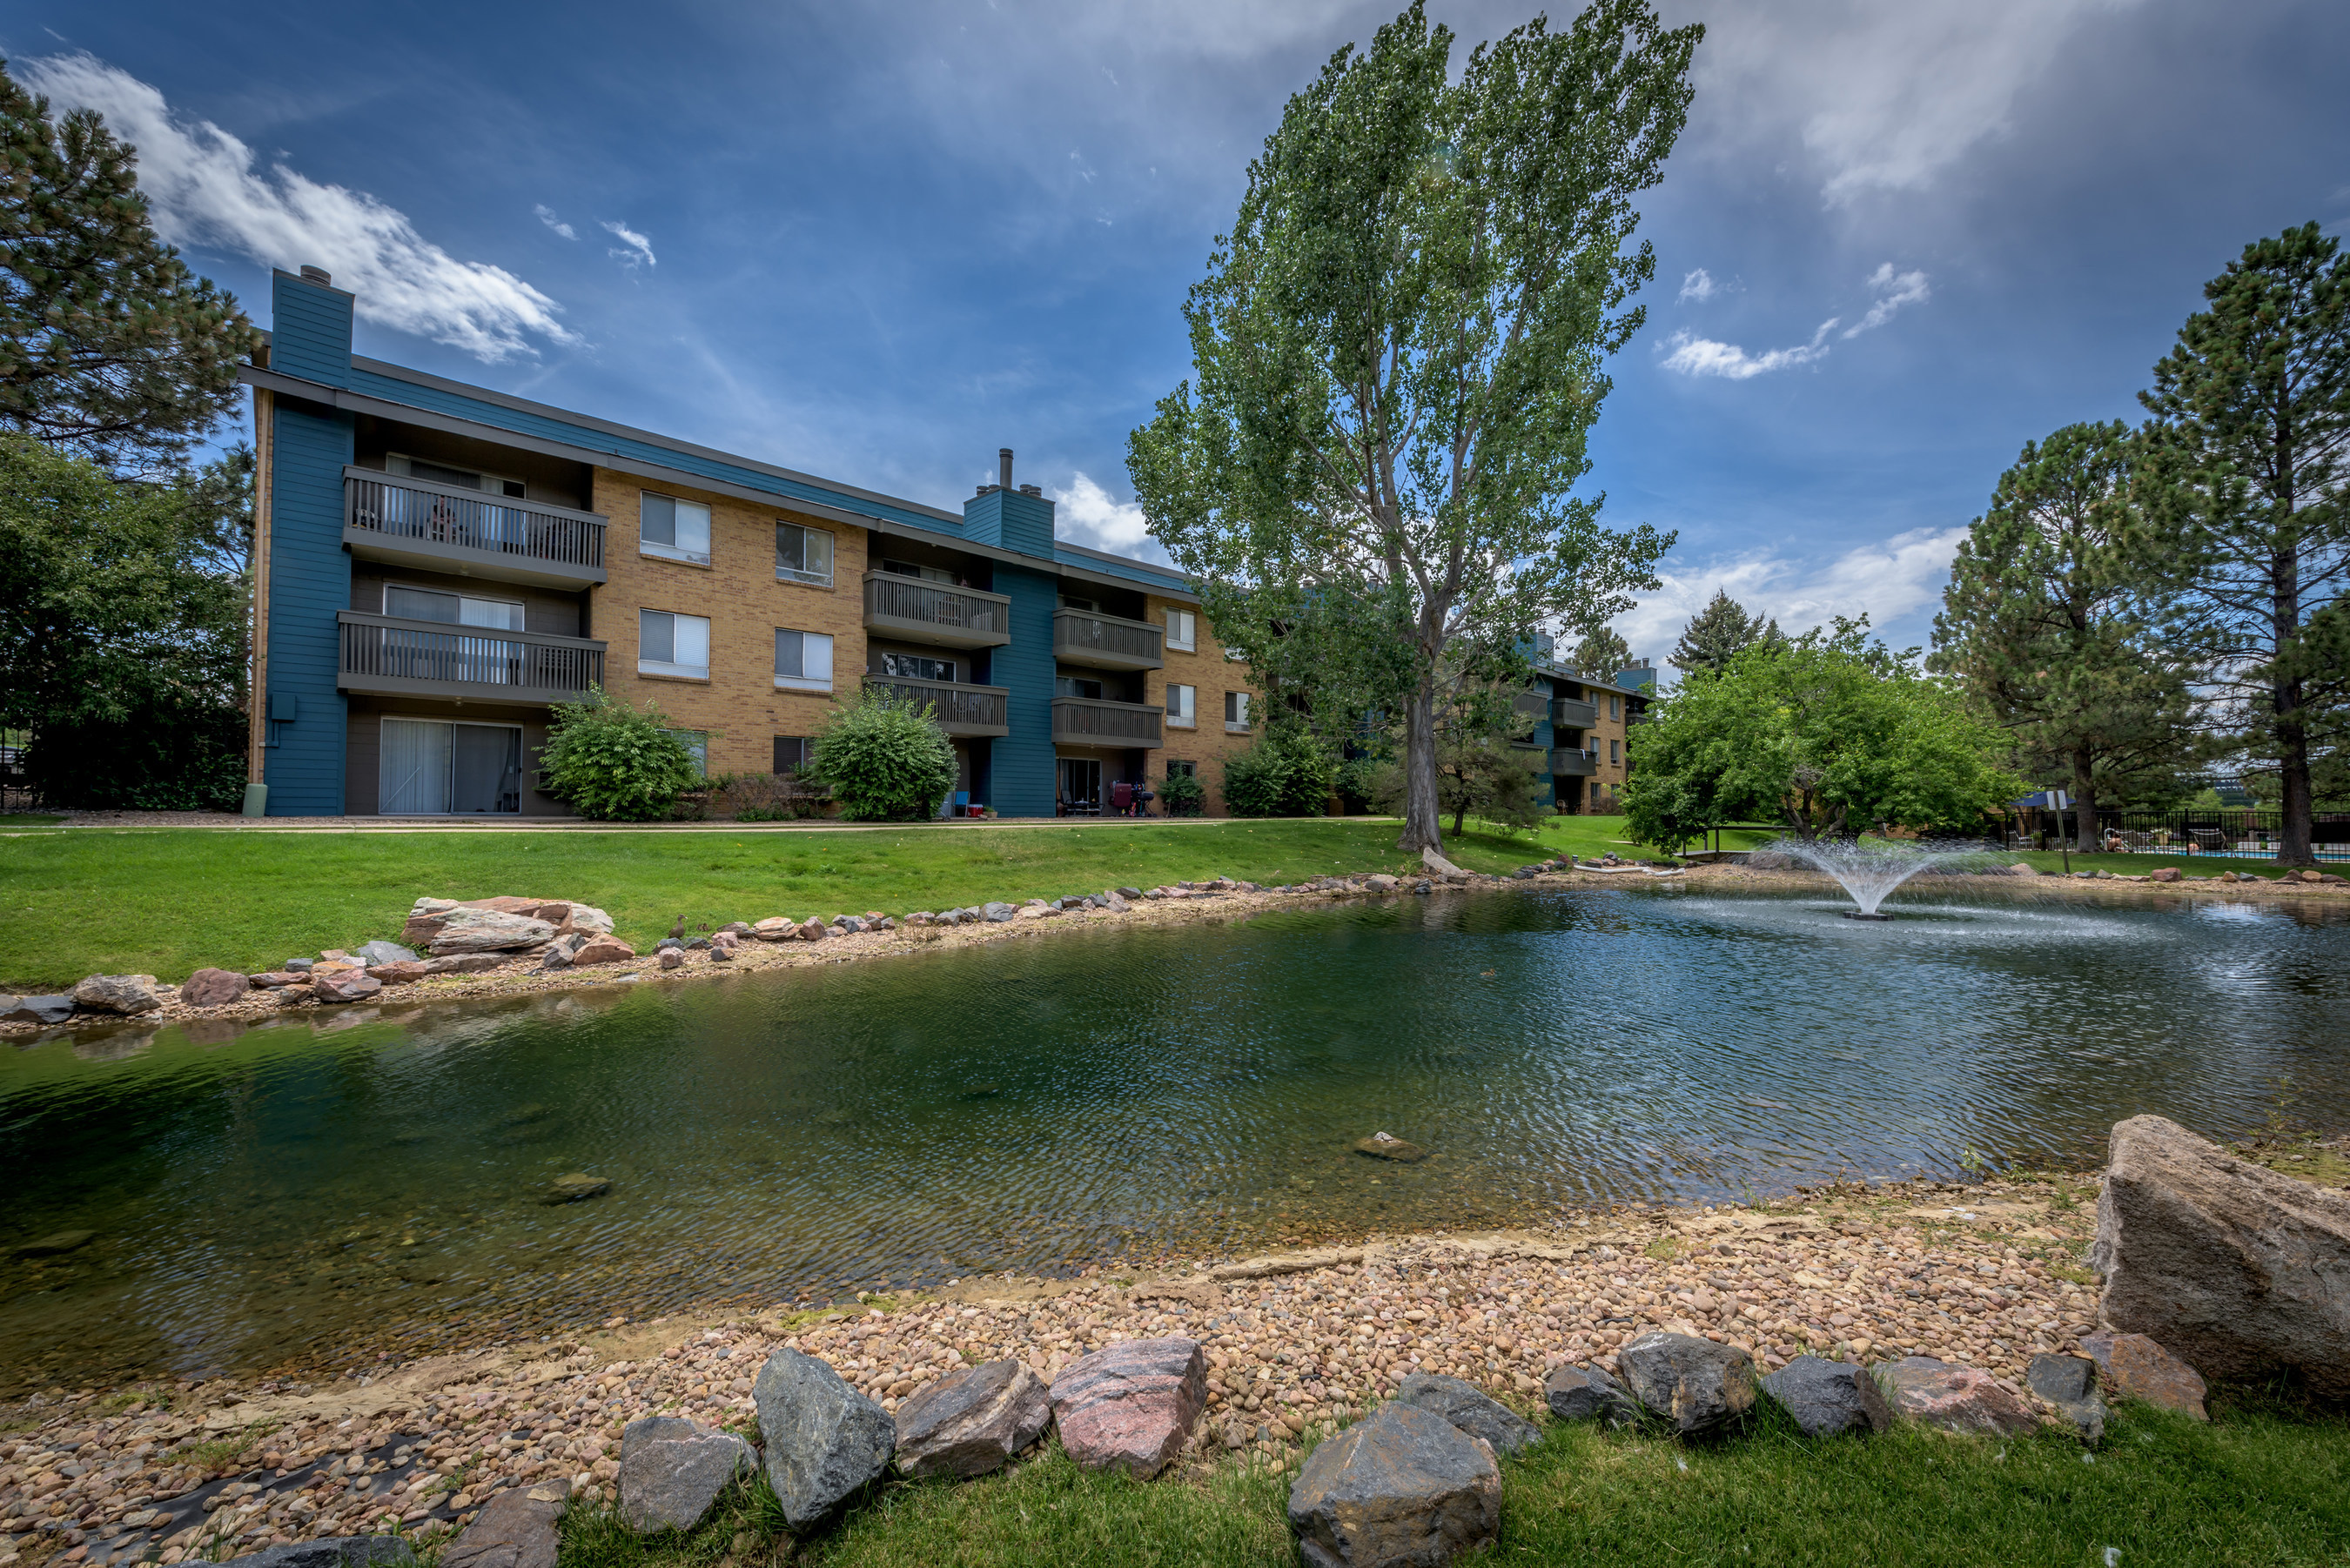 MG Properties Group Adds to Denver Portfolio With $141 Million Acquisition of 3300 Tamarac Apartments in Hampden Neighborhood